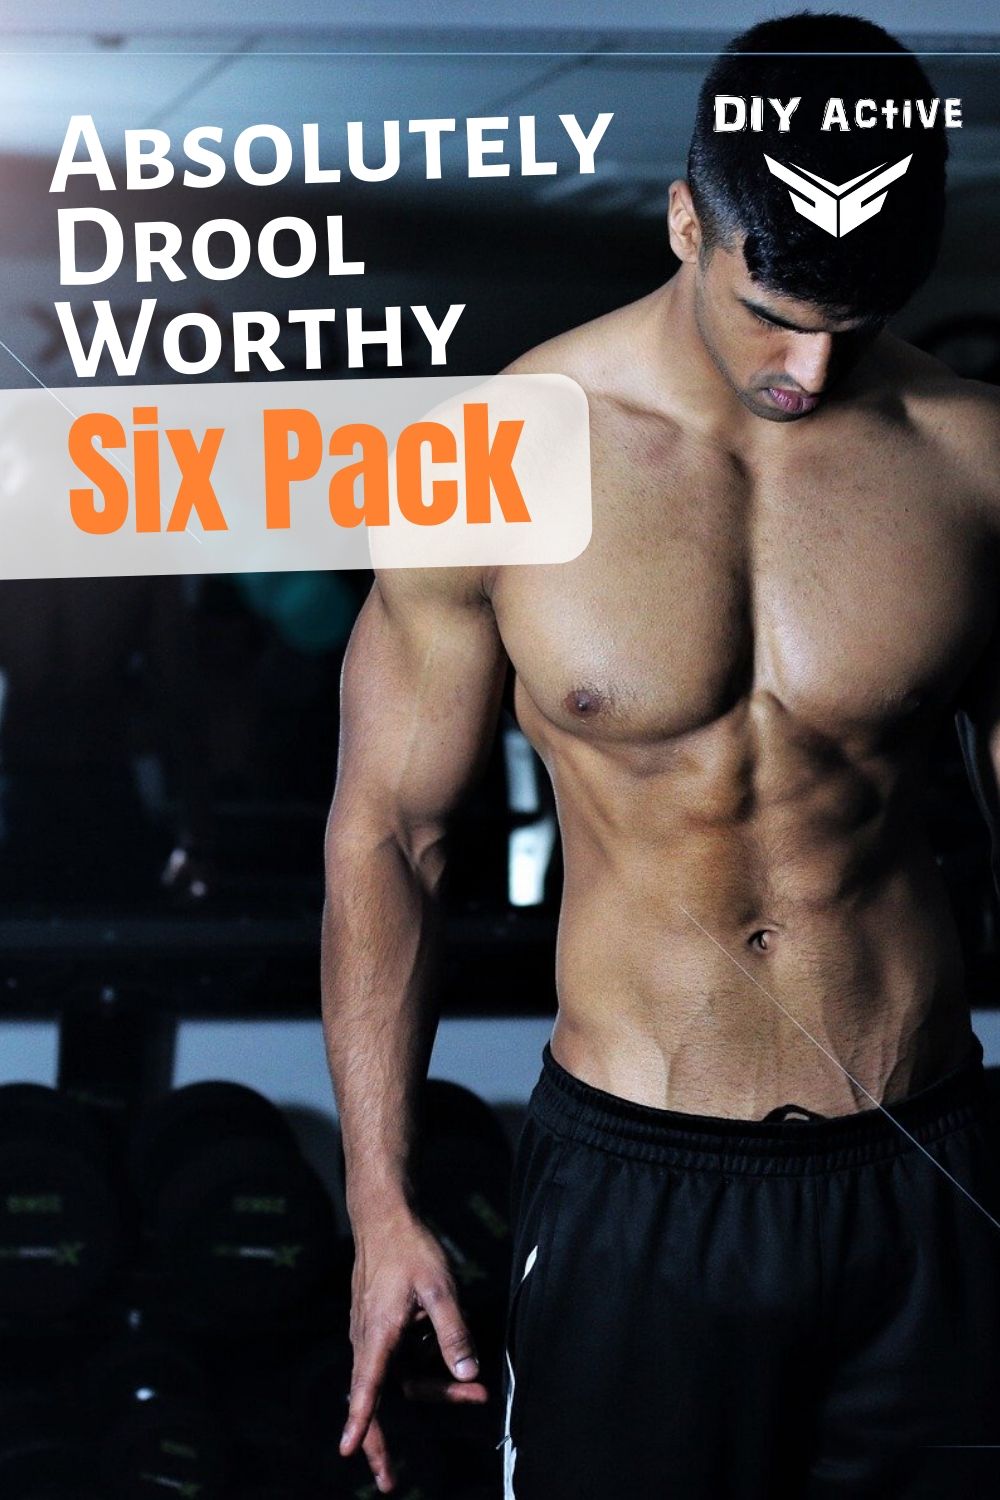 5 Tips to Get a Totally Drooling Six Pack